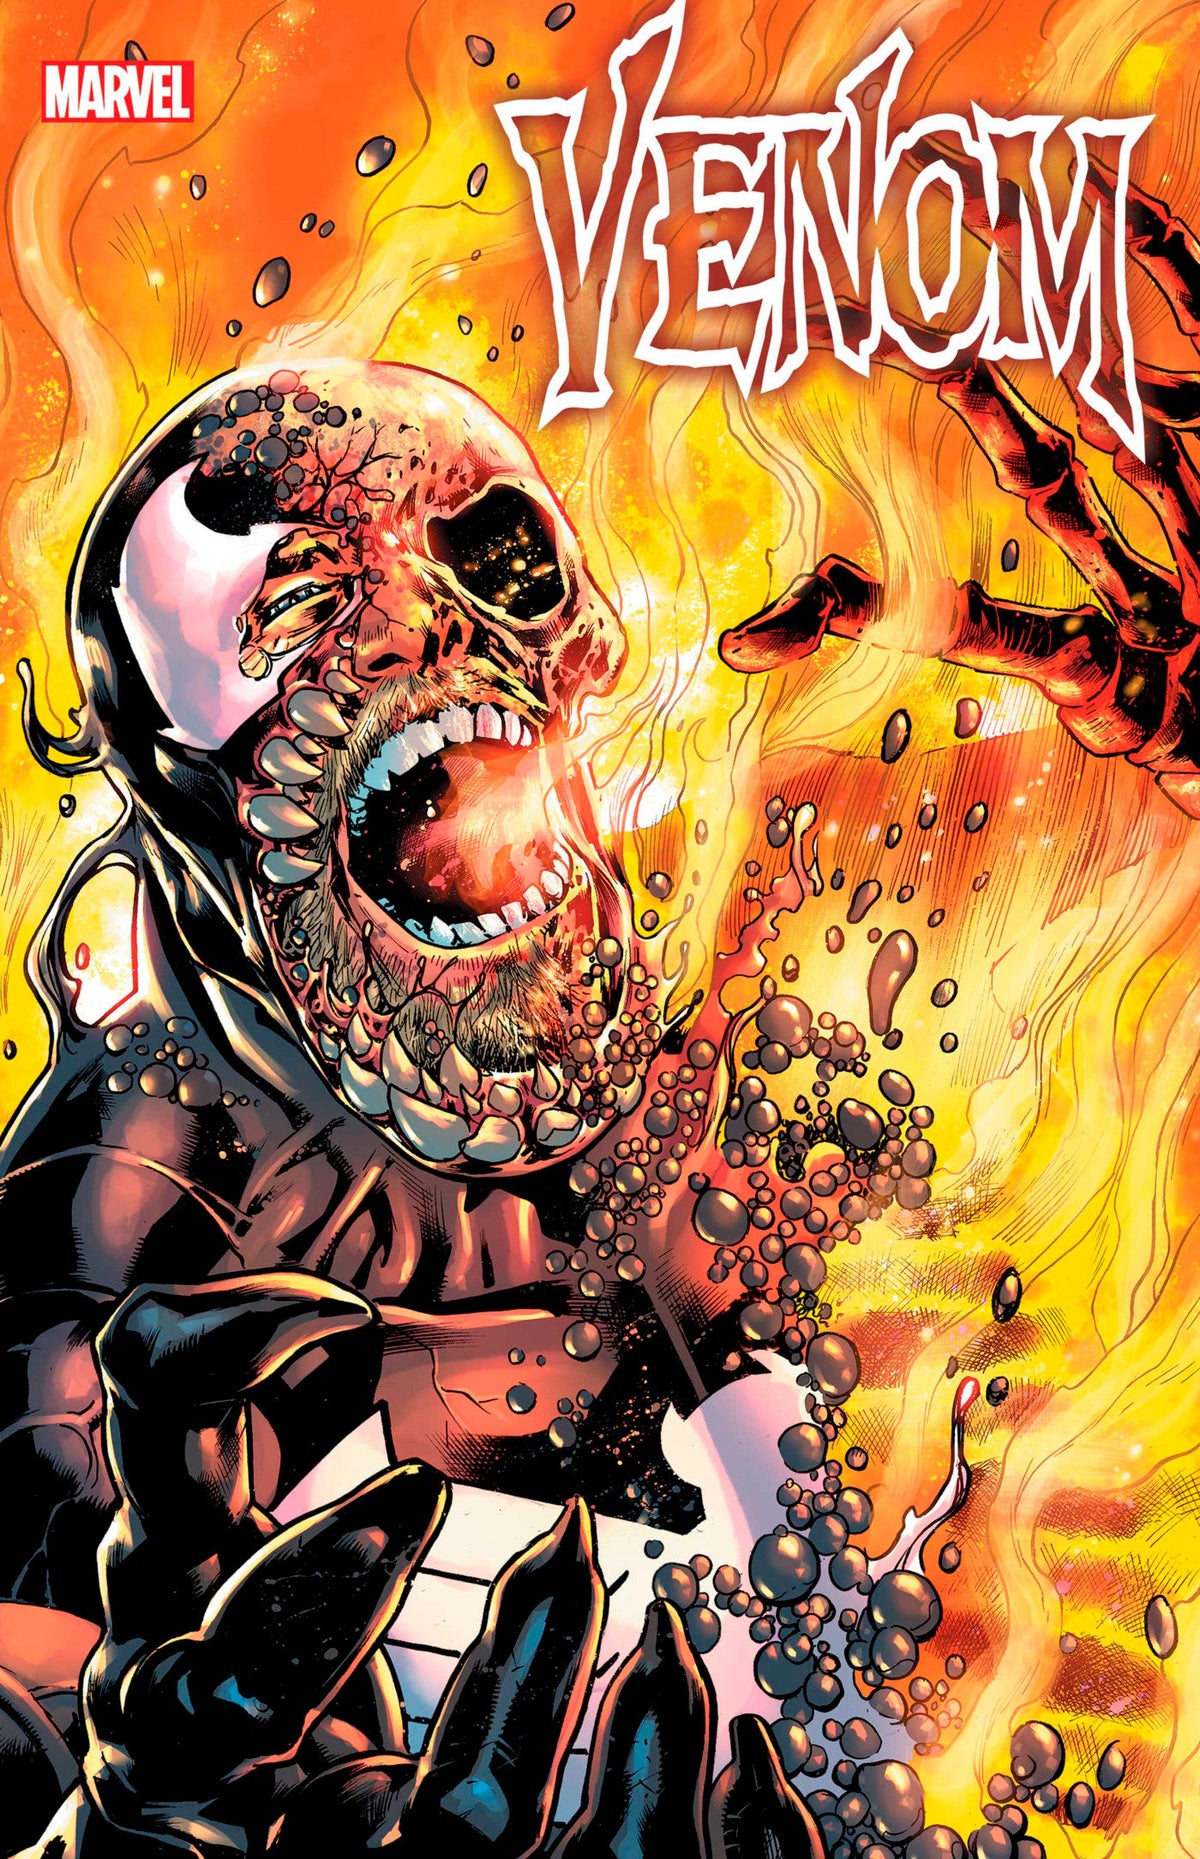 Image of Venom 2 comic sold by Stronghold Collectibles.